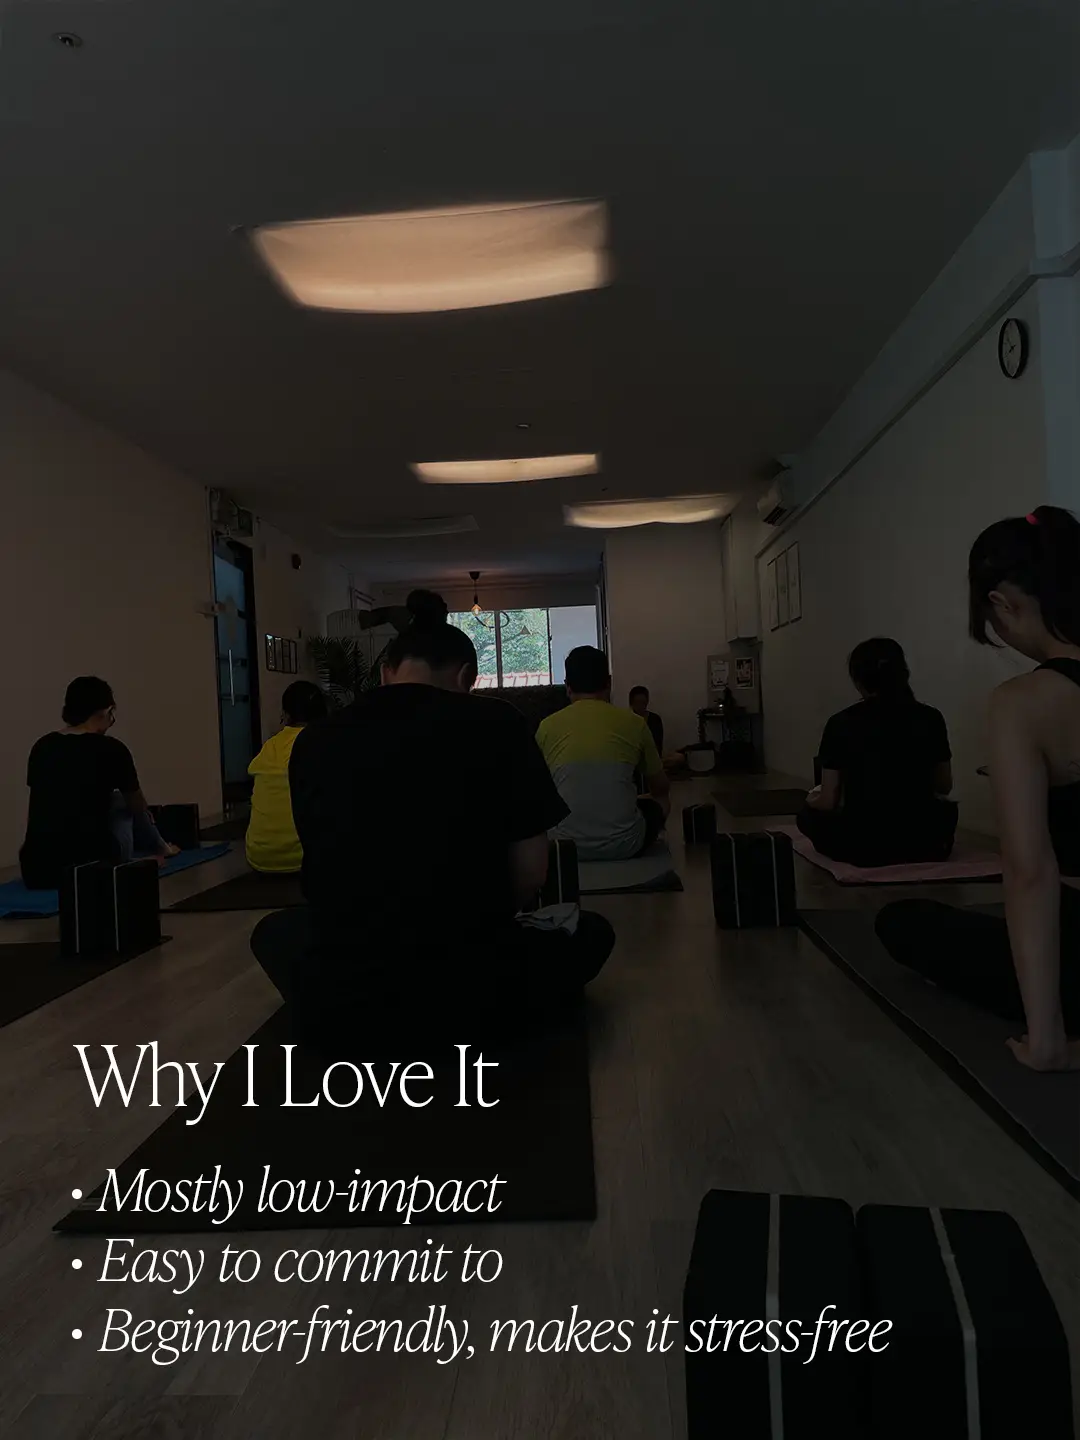 why i love yoga 🍃 and why you should try it too 🤍's images(1)